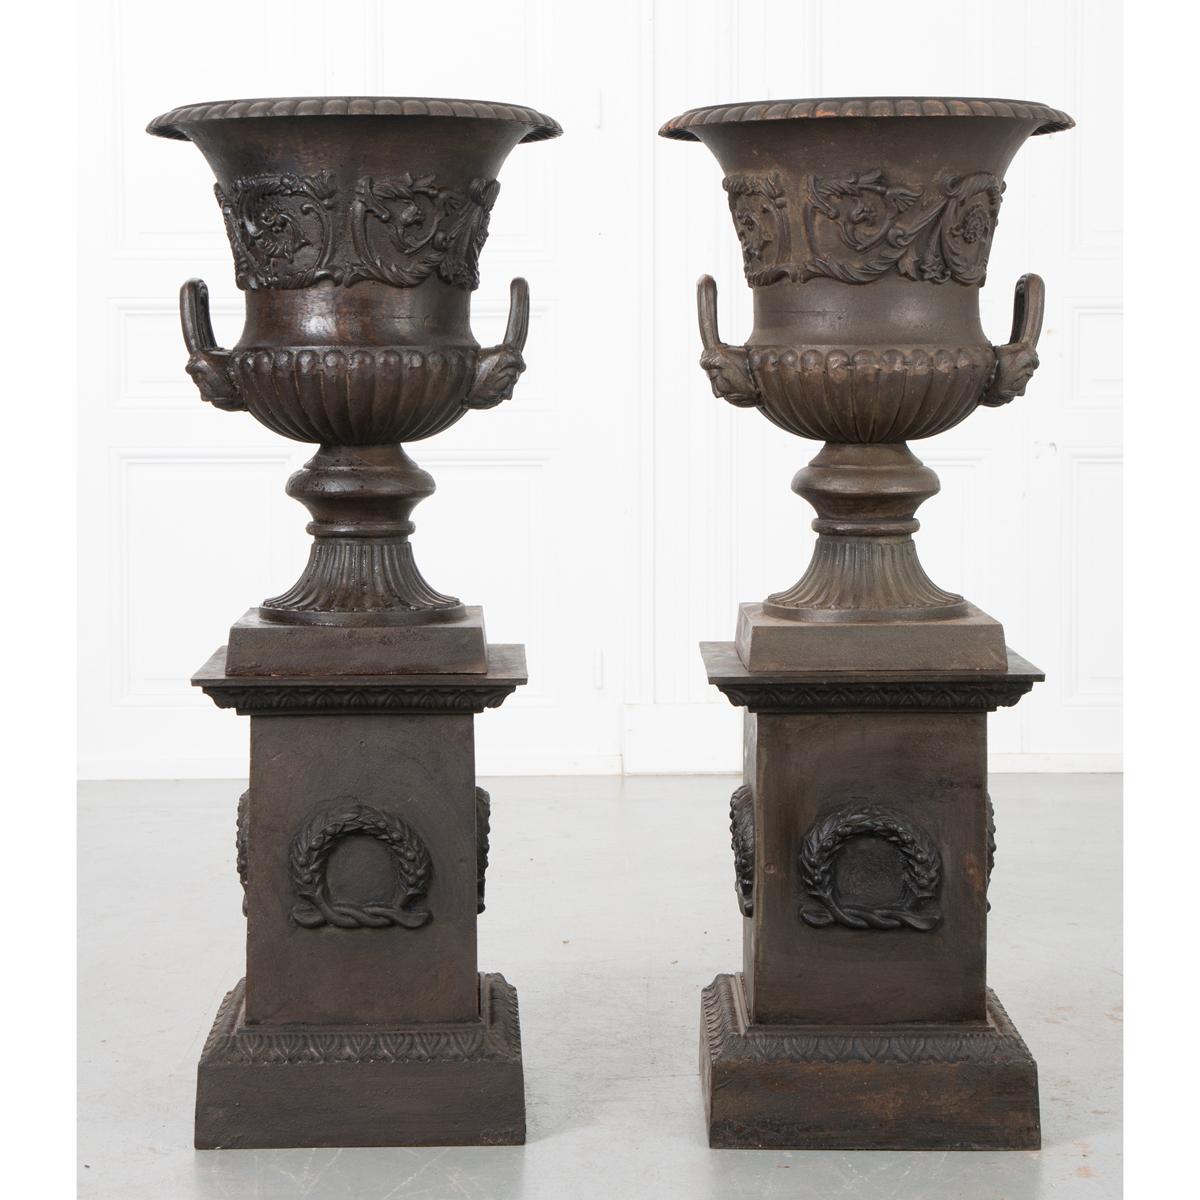 A pair of urn-form planters rest upon a pair of pedestals to complete this duo of garden antiques. Made in France in the 1900’s, the planters are cast iron and each has a drain to accommodate watering. A classic shaped urn with foliage around the